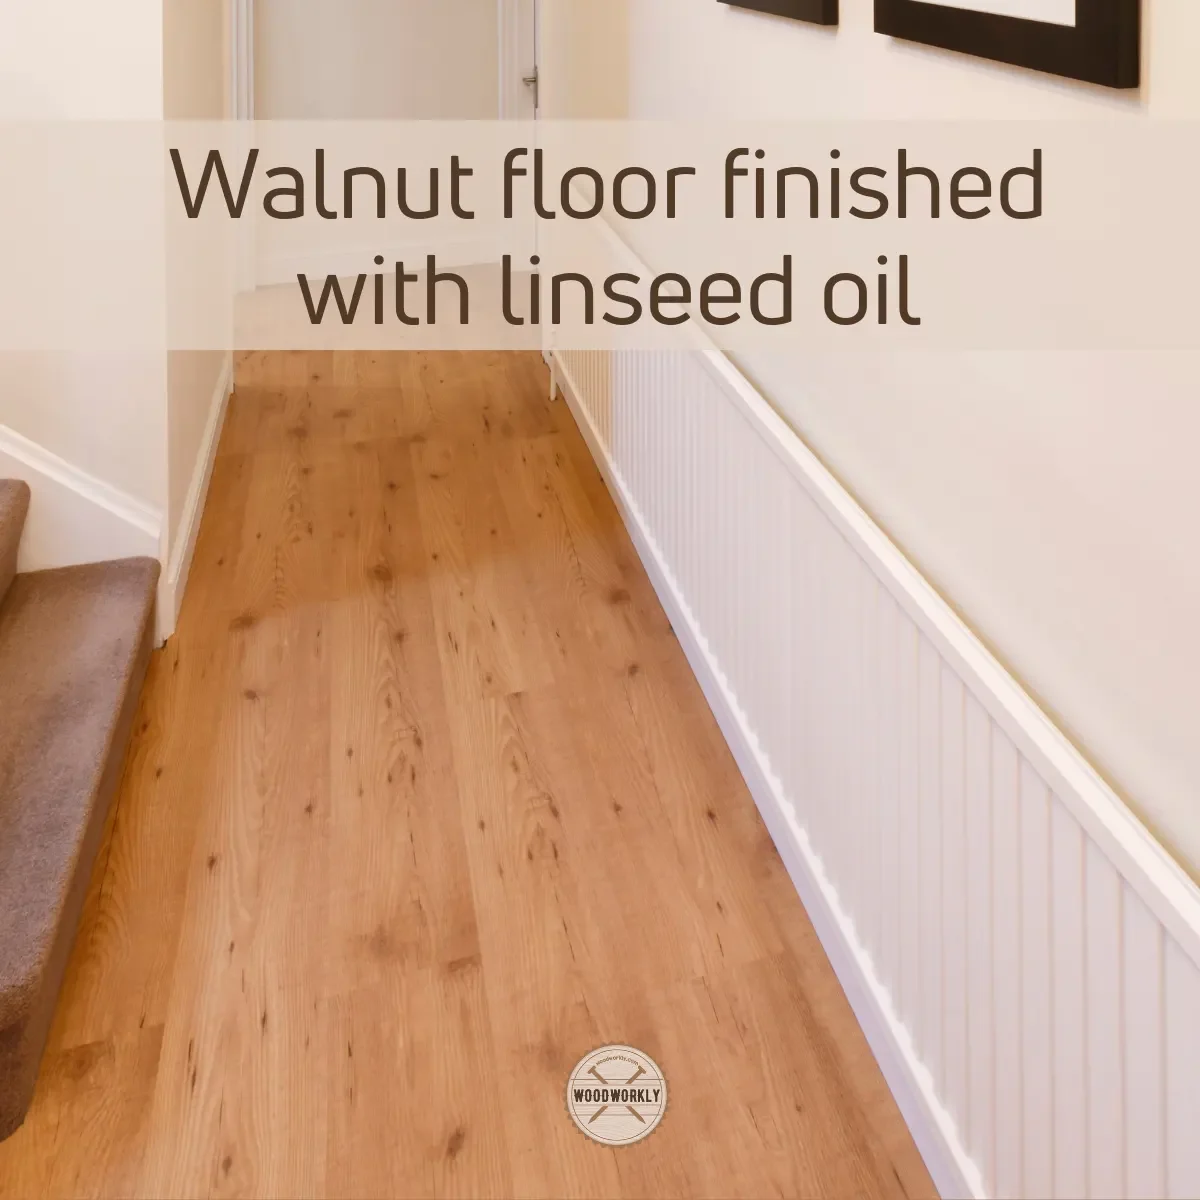 Walnut floor finished with linseed oil